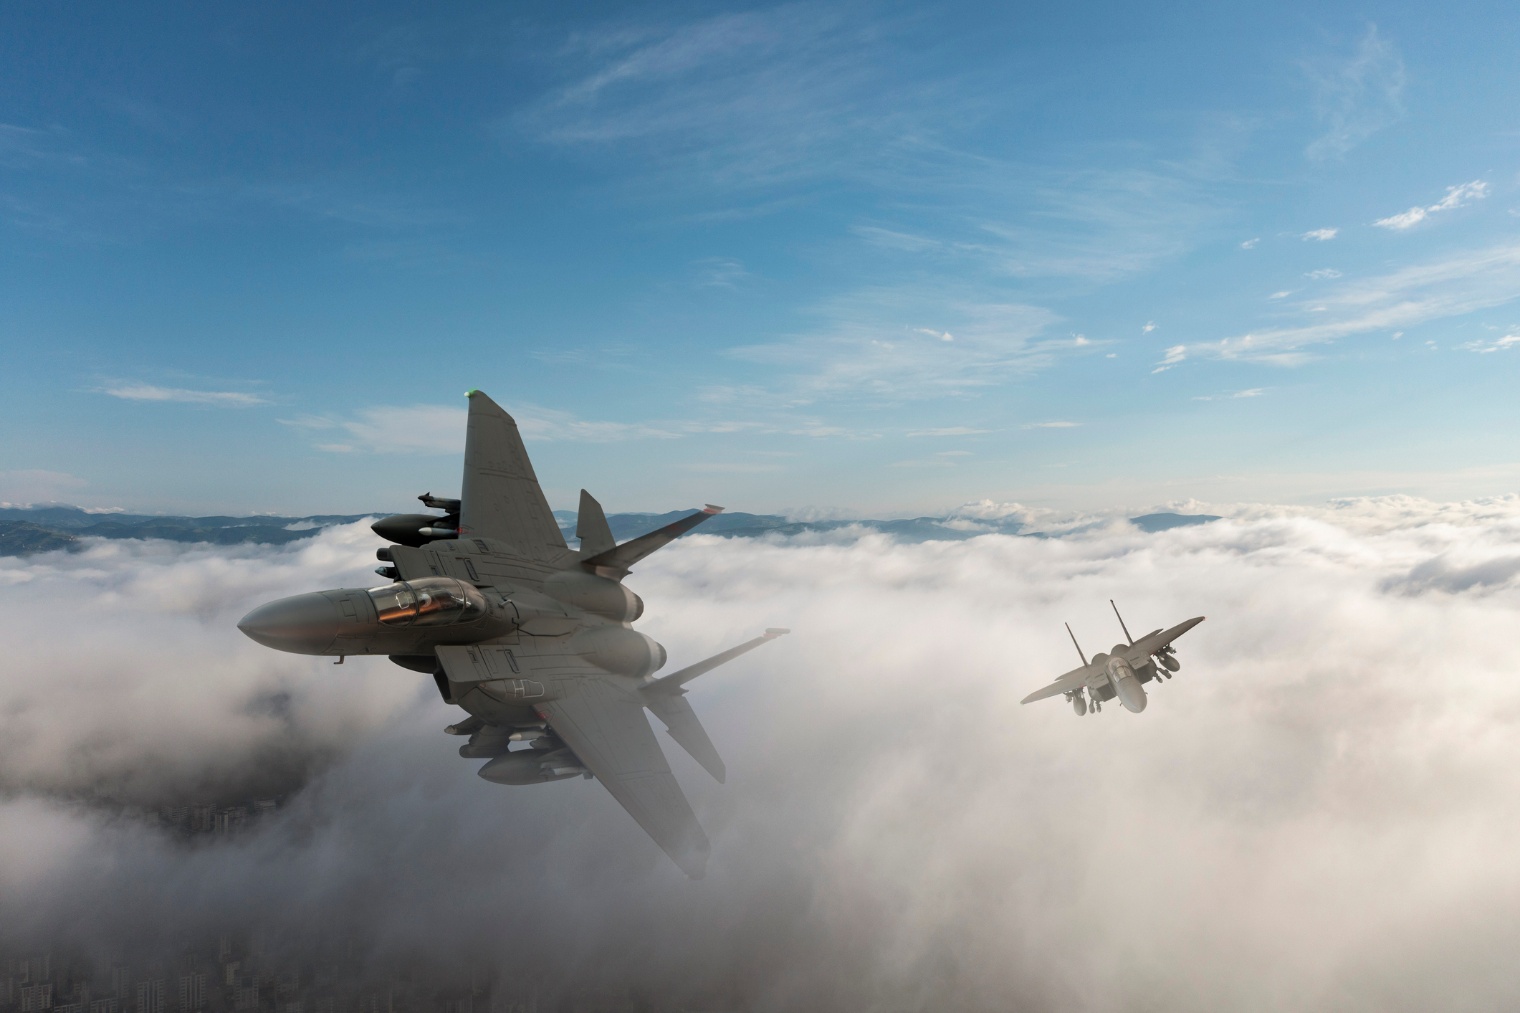 Fighter jets above the clouds